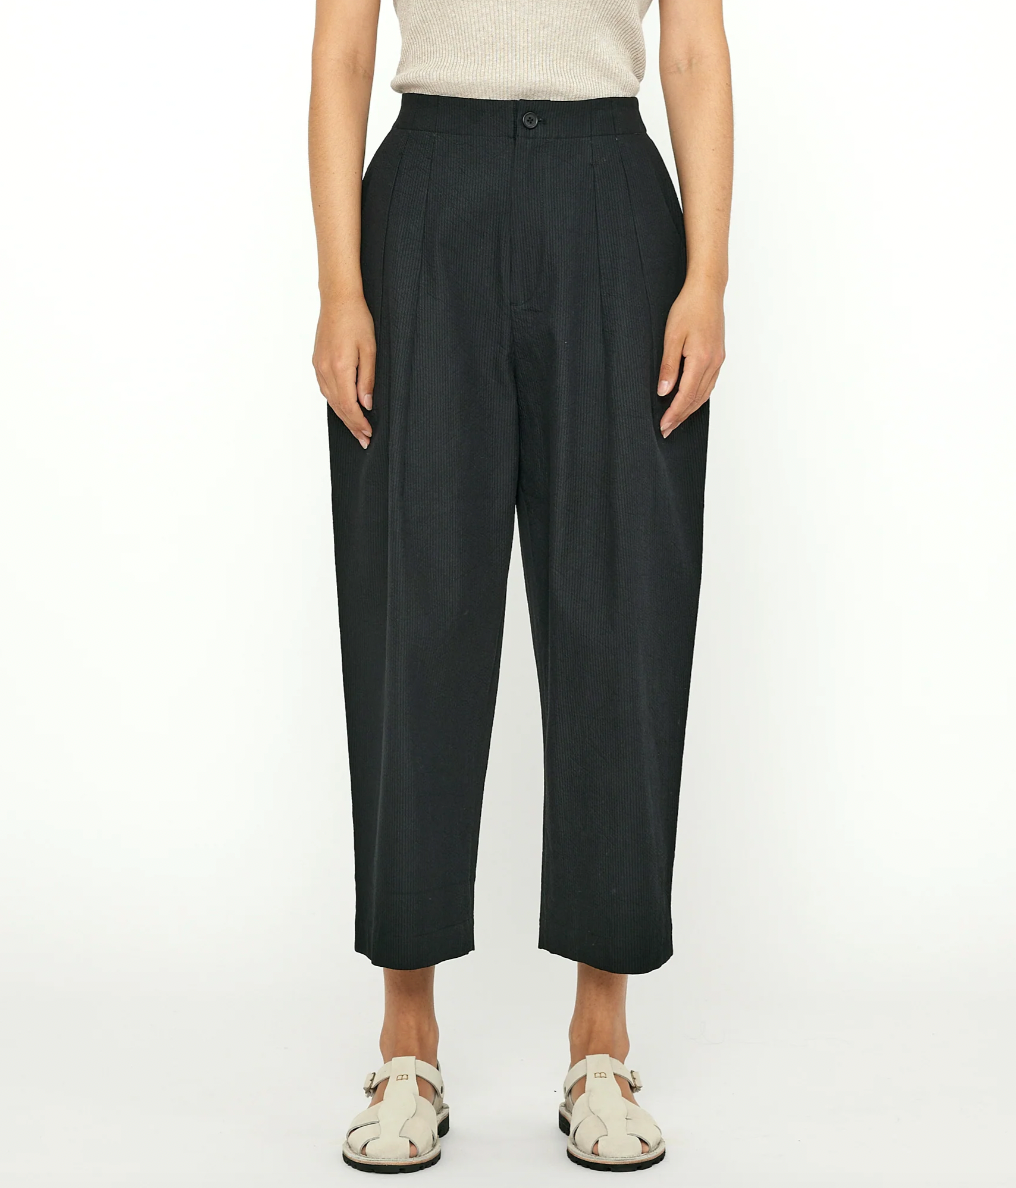 Product Image for Pleated Trouser Black Stripe Edition, Black